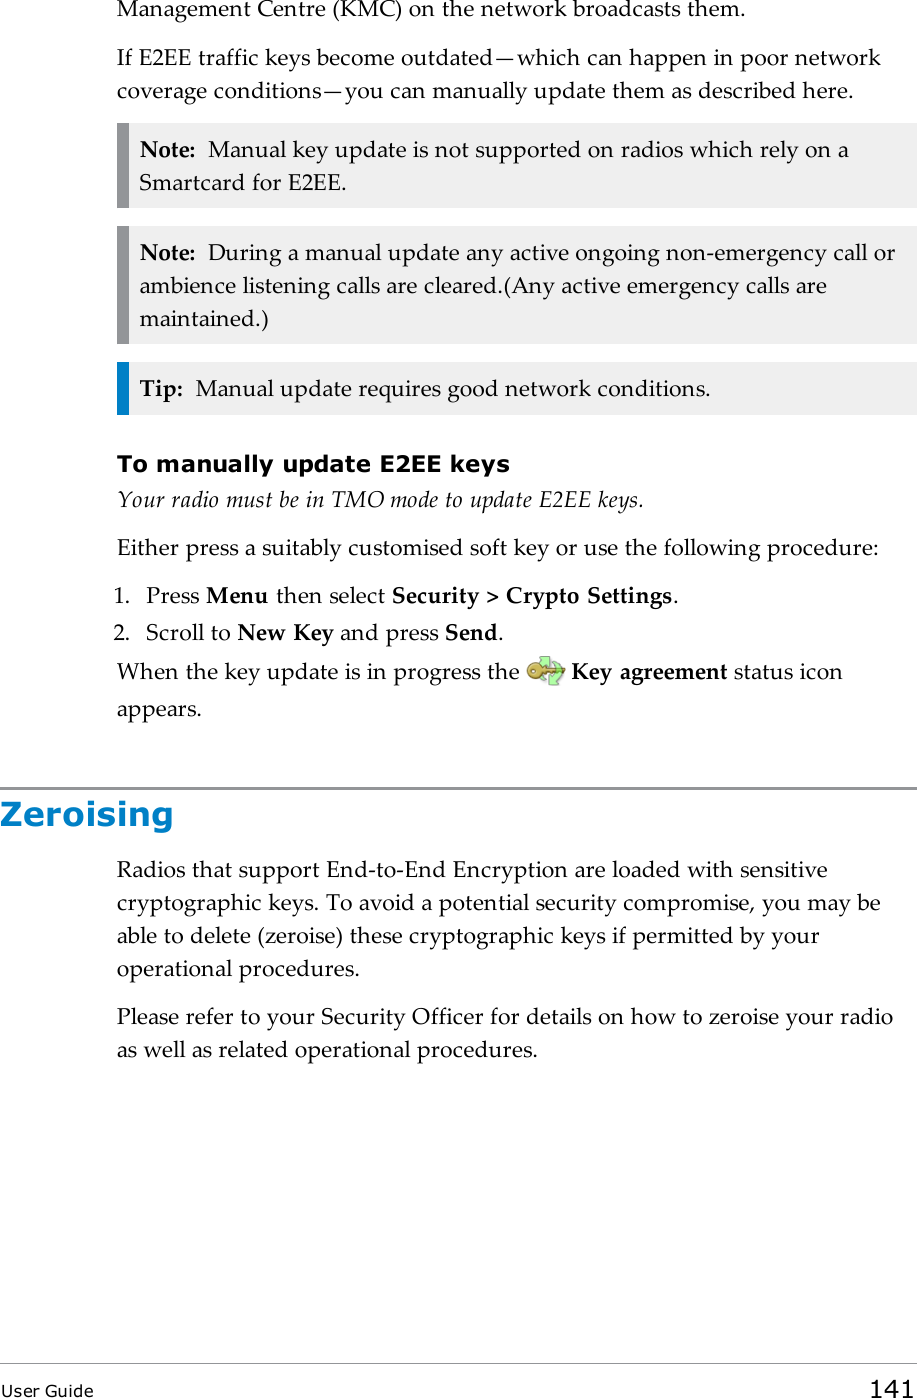 Management Centre (KMC) on the network broadcasts them.If E2EE traffic keys become outdated—which can happen in poor networkcoverage conditions—you can manually update them as described here.Note: Manual key update is not supported on radios which rely on aSmartcard for E2EE.Note: During a manual update any active ongoing non-emergency call orambience listening calls are cleared.(Any active emergency calls aremaintained.)Tip: Manual update requires good network conditions.To manually update E2EE keysYour radio must be in TMO mode to update E2EE keys.Either press a suitably customised soft key or use the following procedure:1. Press Menu then select Security &gt; Crypto Settings.2. Scroll to New Key and press Send.When the key update is in progress the Key agreement status iconappears.ZeroisingRadios that support End-to-End Encryption are loaded with sensitivecryptographic keys. To avoid a potential security compromise, you may beable to delete (zeroise) these cryptographic keys if permitted by youroperational procedures.Please refer to your Security Officer for details on how to zeroise your radioas well as related operational procedures.User Guide 141